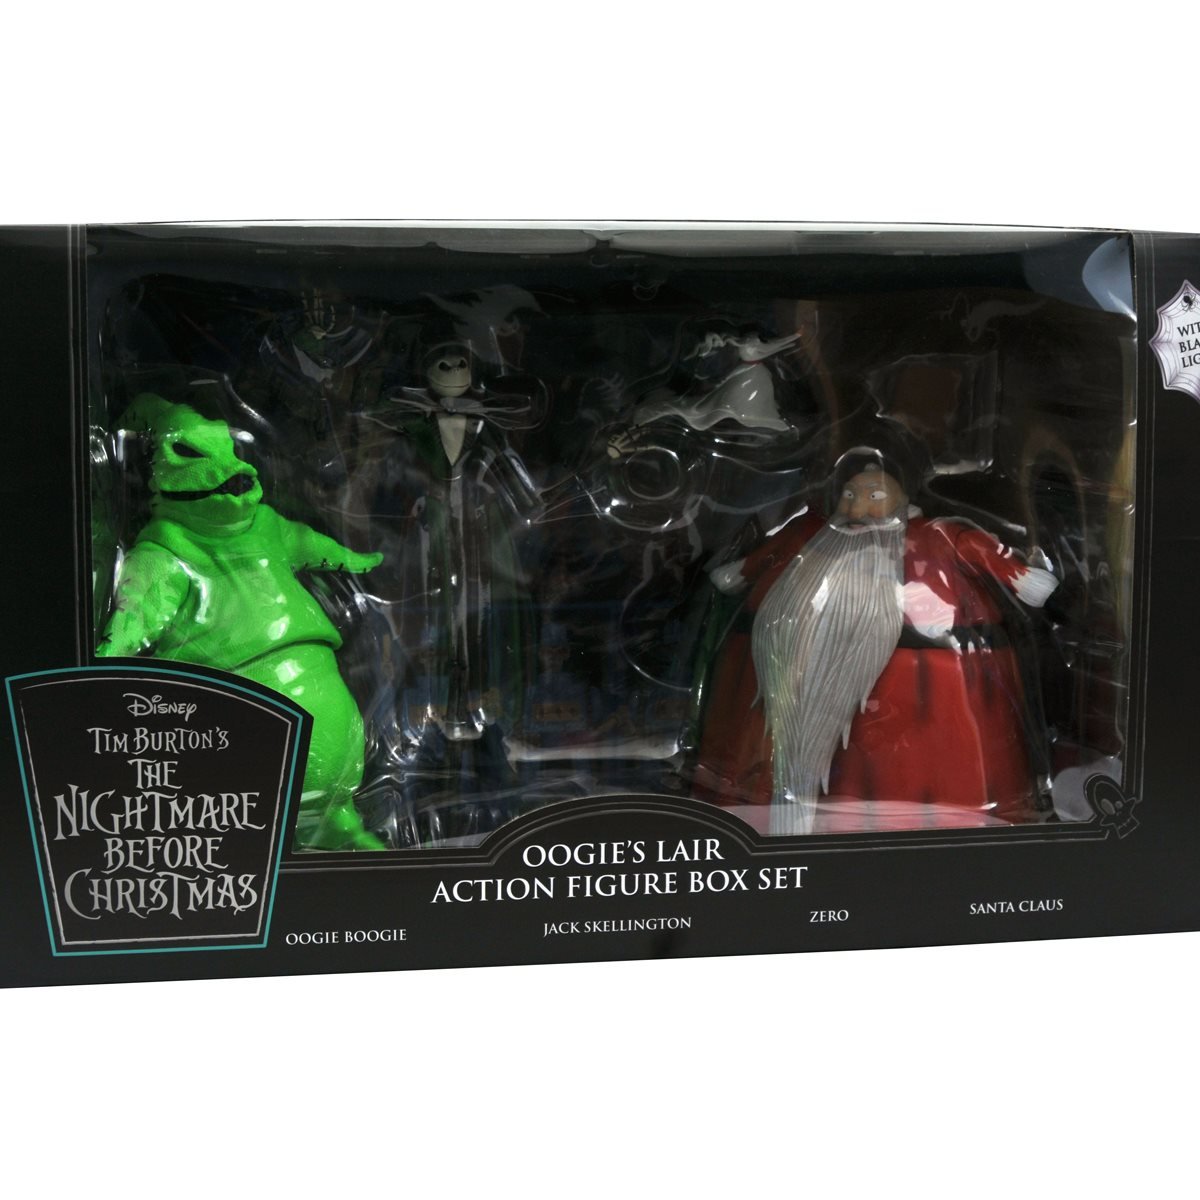 The Nightmare Before Christmas, Oogie Boogie Deluxe 7” Scale Action Figure  by Diamond Select Toys